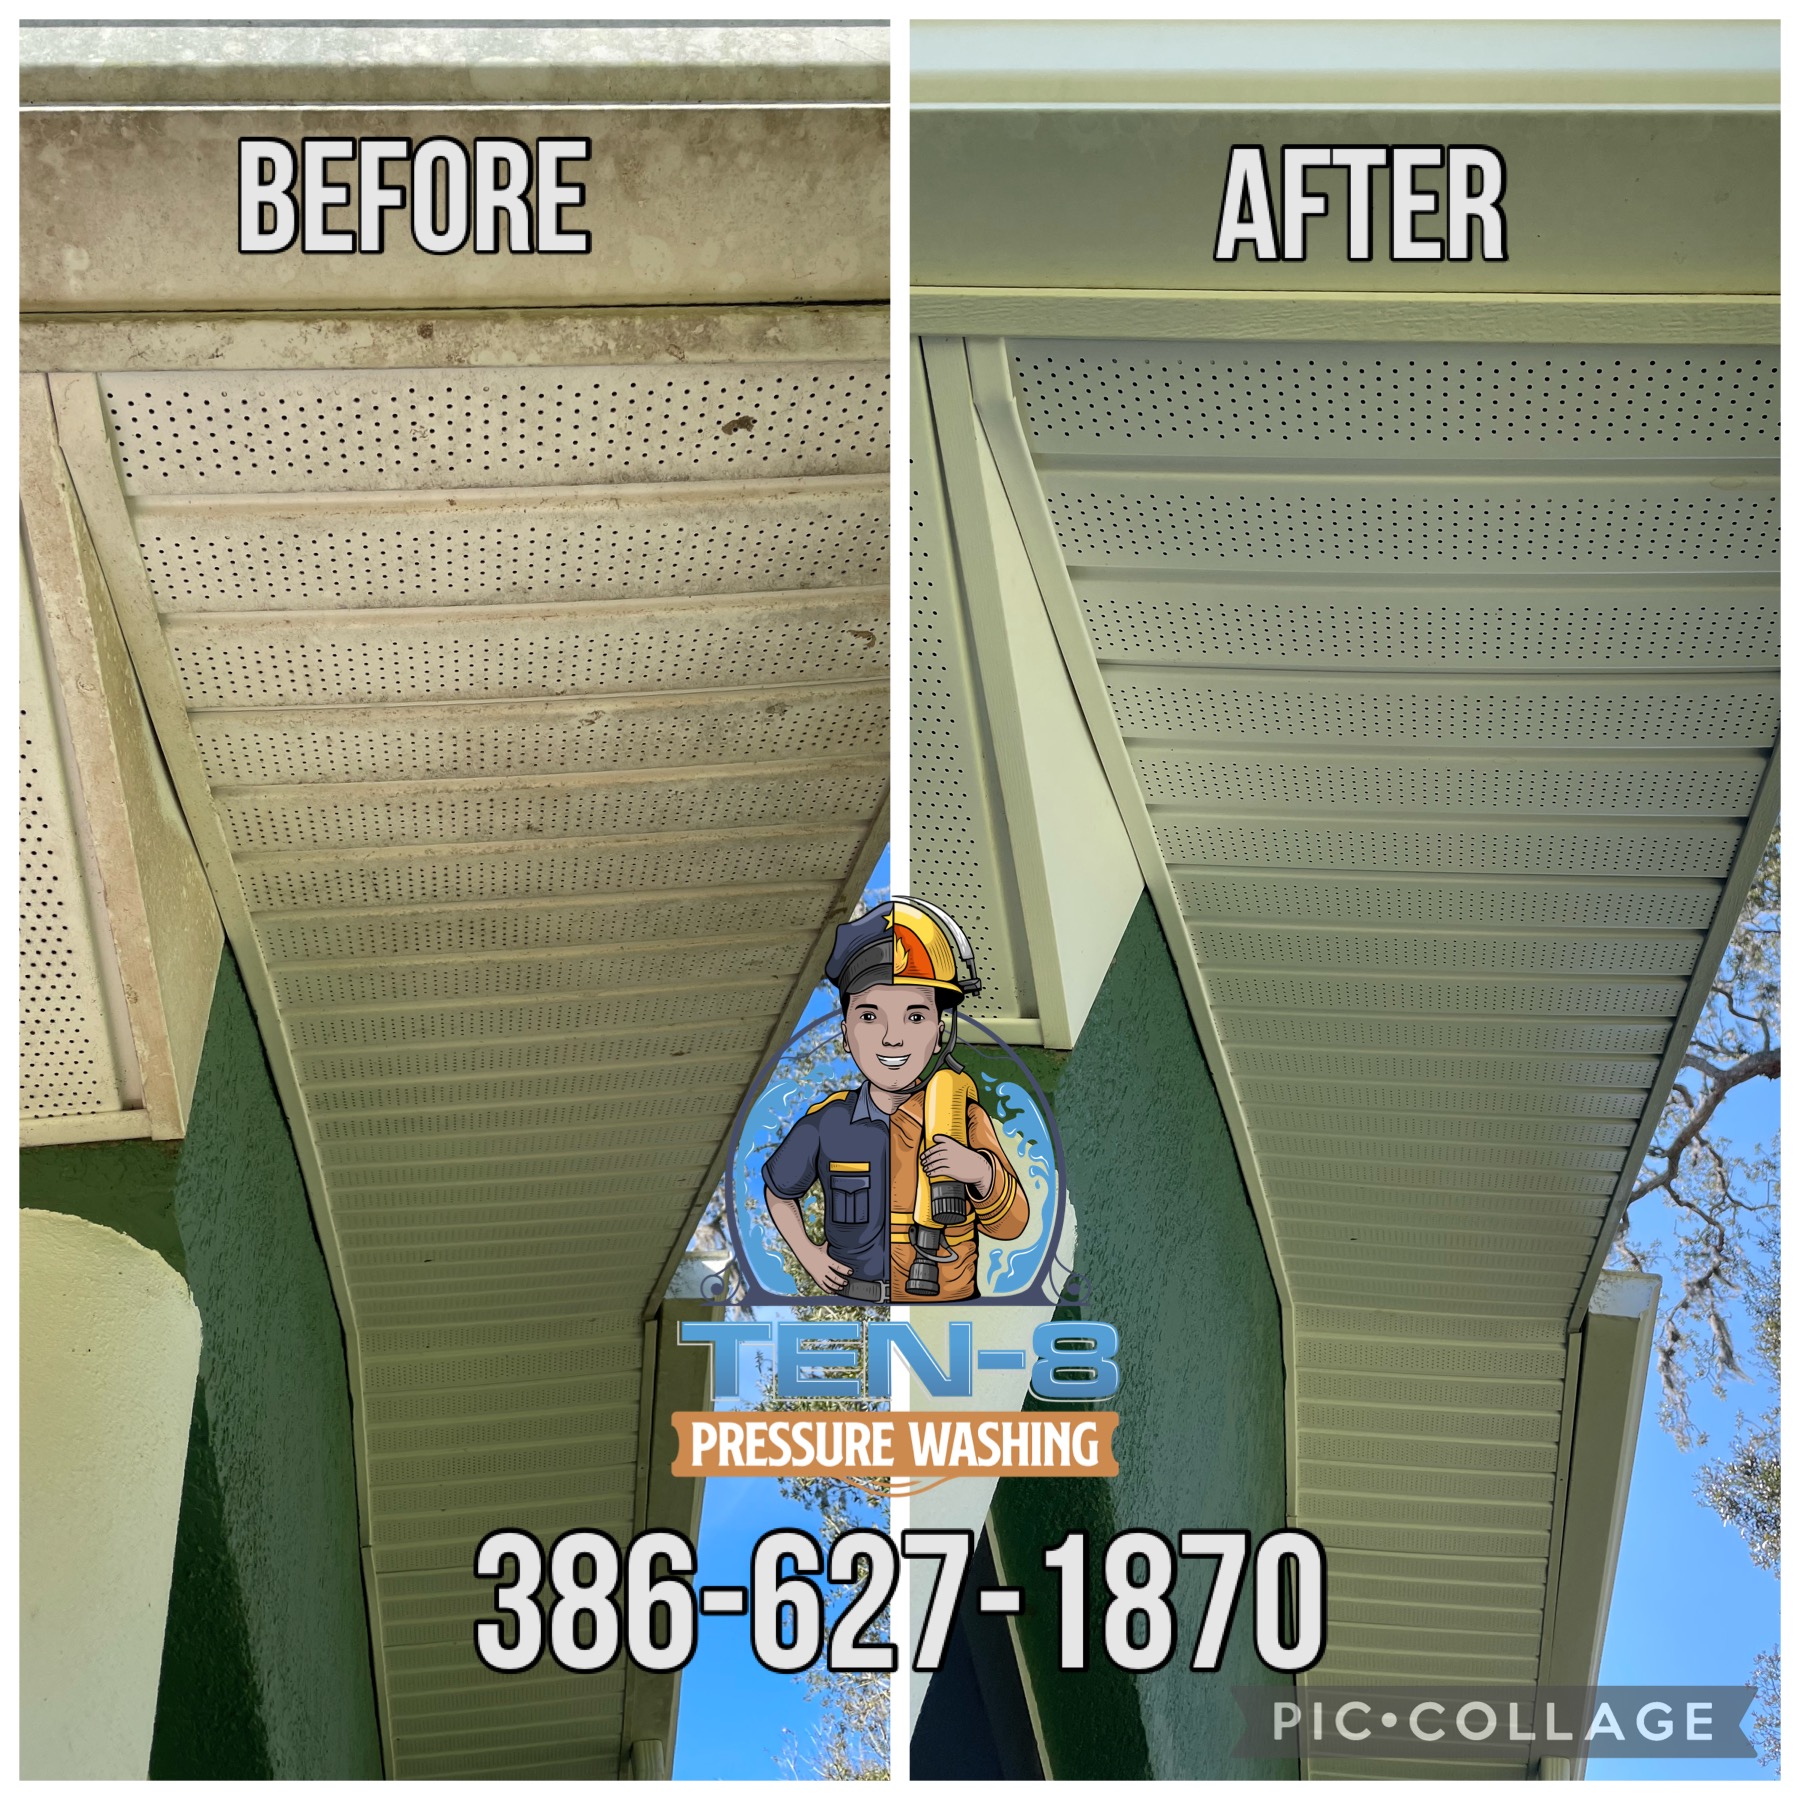 Residential Pressure Washing: Refreshing House Wash, Expert Gutter Cleaning, and Gleaming Driveway Services in Flagler, Flagler Beach, Palm Coast and surrounding areas